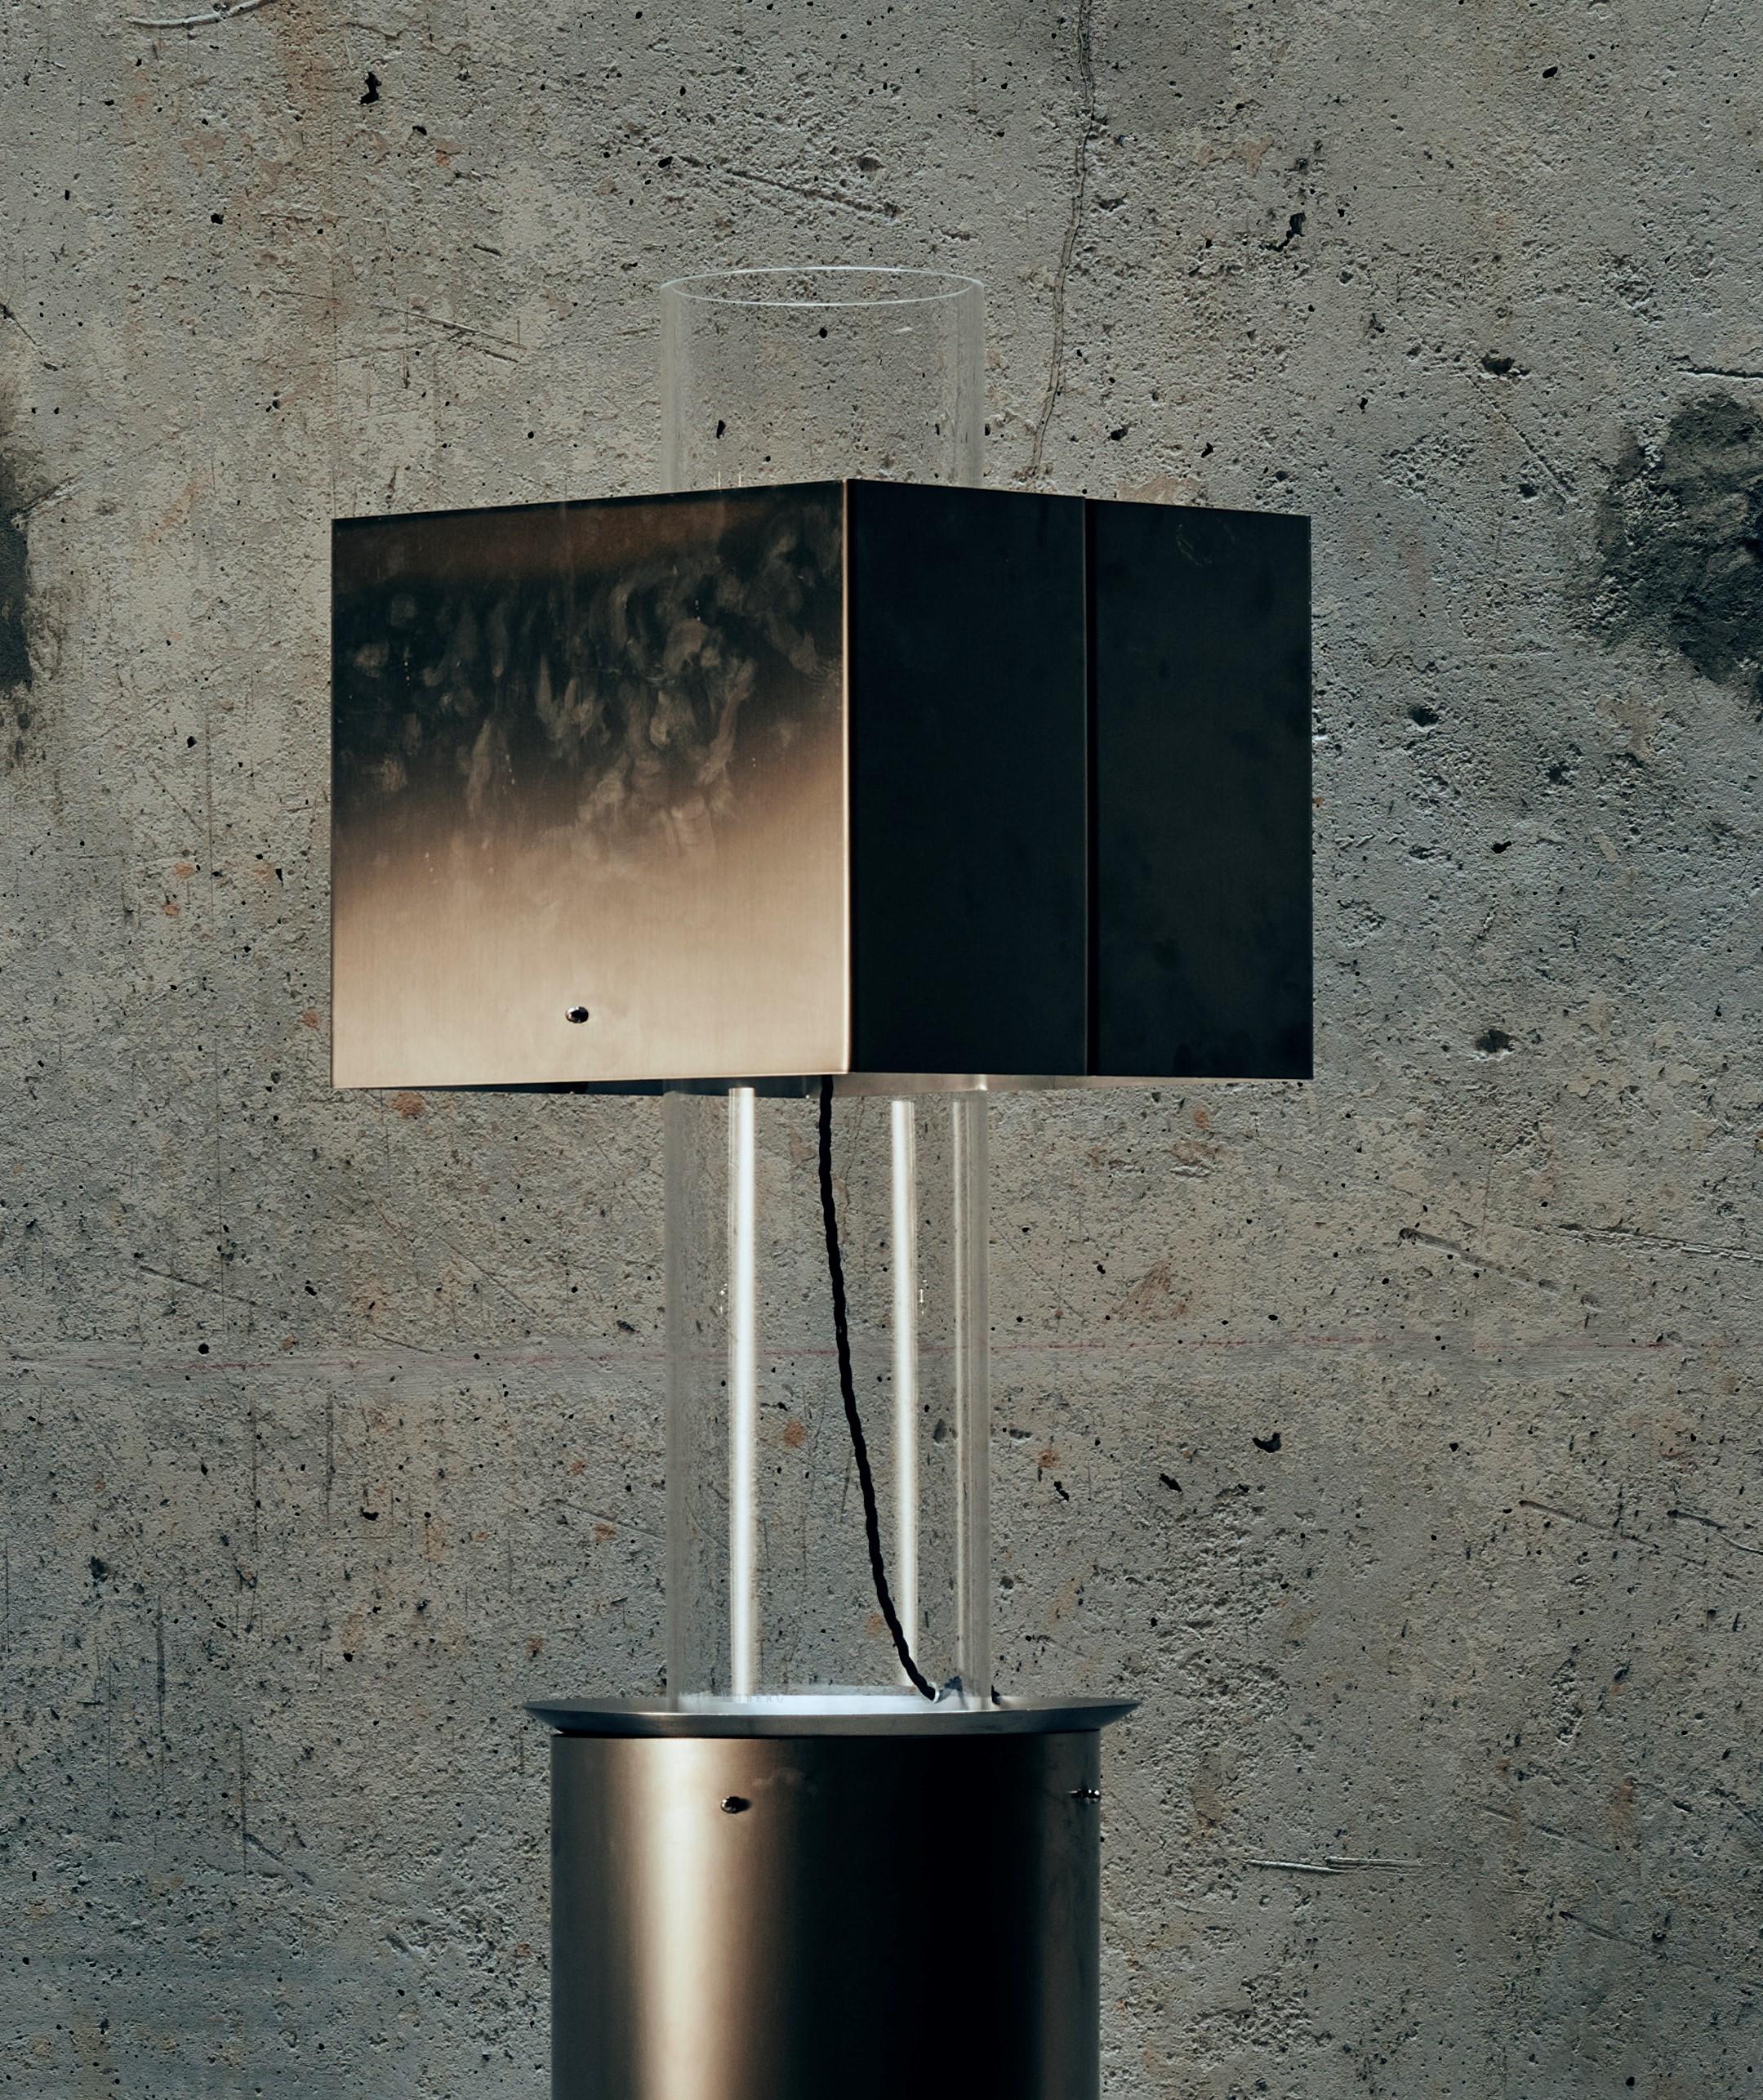 Stainless steel floating lamp by Brajak Vitberg
Materials: Plexiglass, stainless steel
Dimensions: 66 x 32.5 cm

Lampshades are available in matte and polished stainless steel, please contact us.

Bijelic and Brajak are two architects from